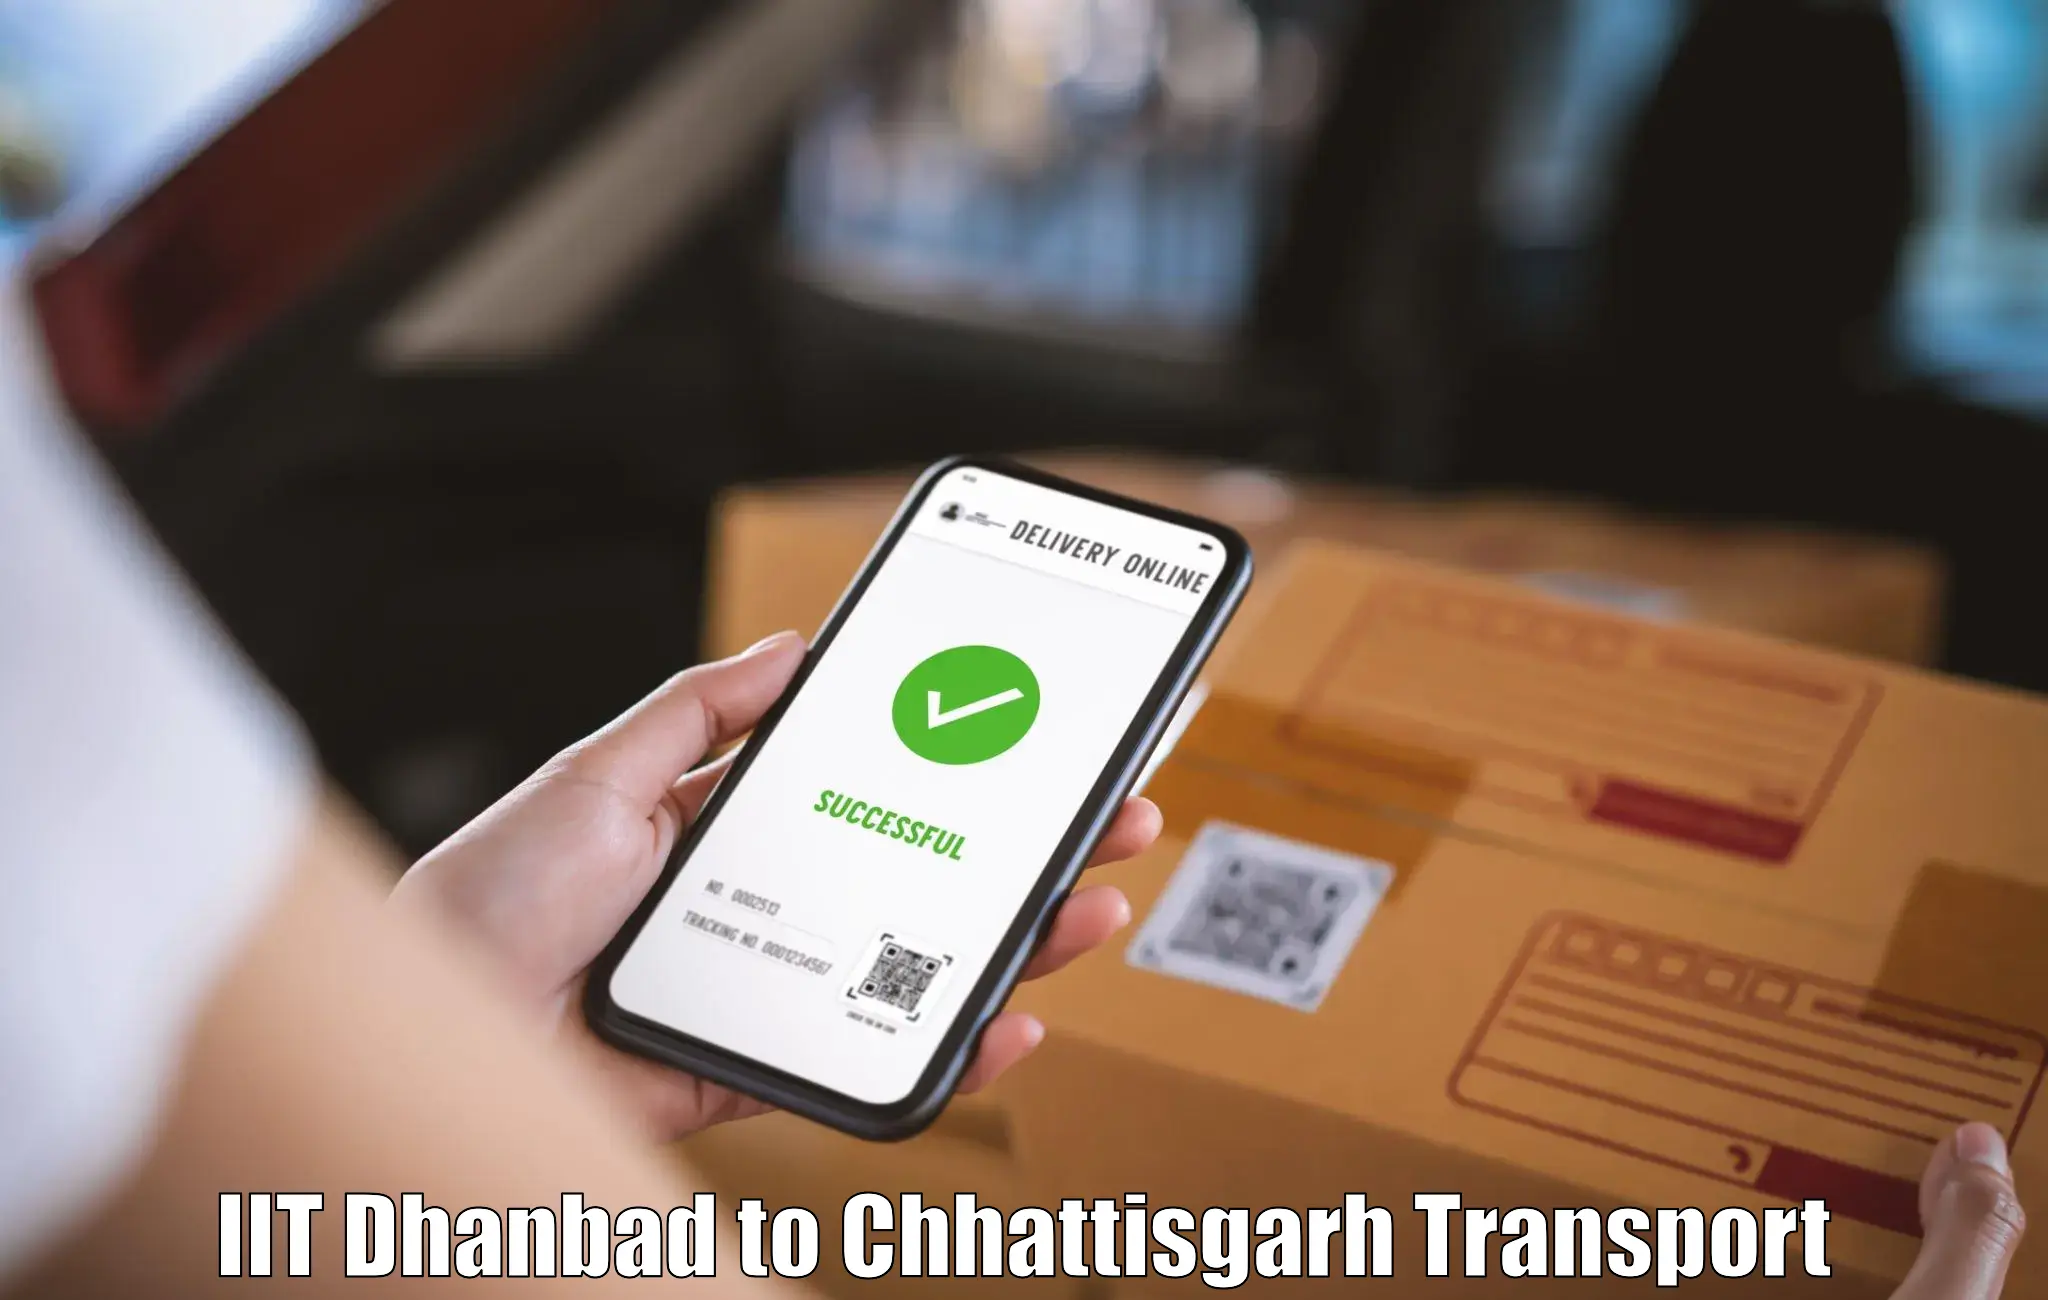 Nationwide transport services IIT Dhanbad to Raipur